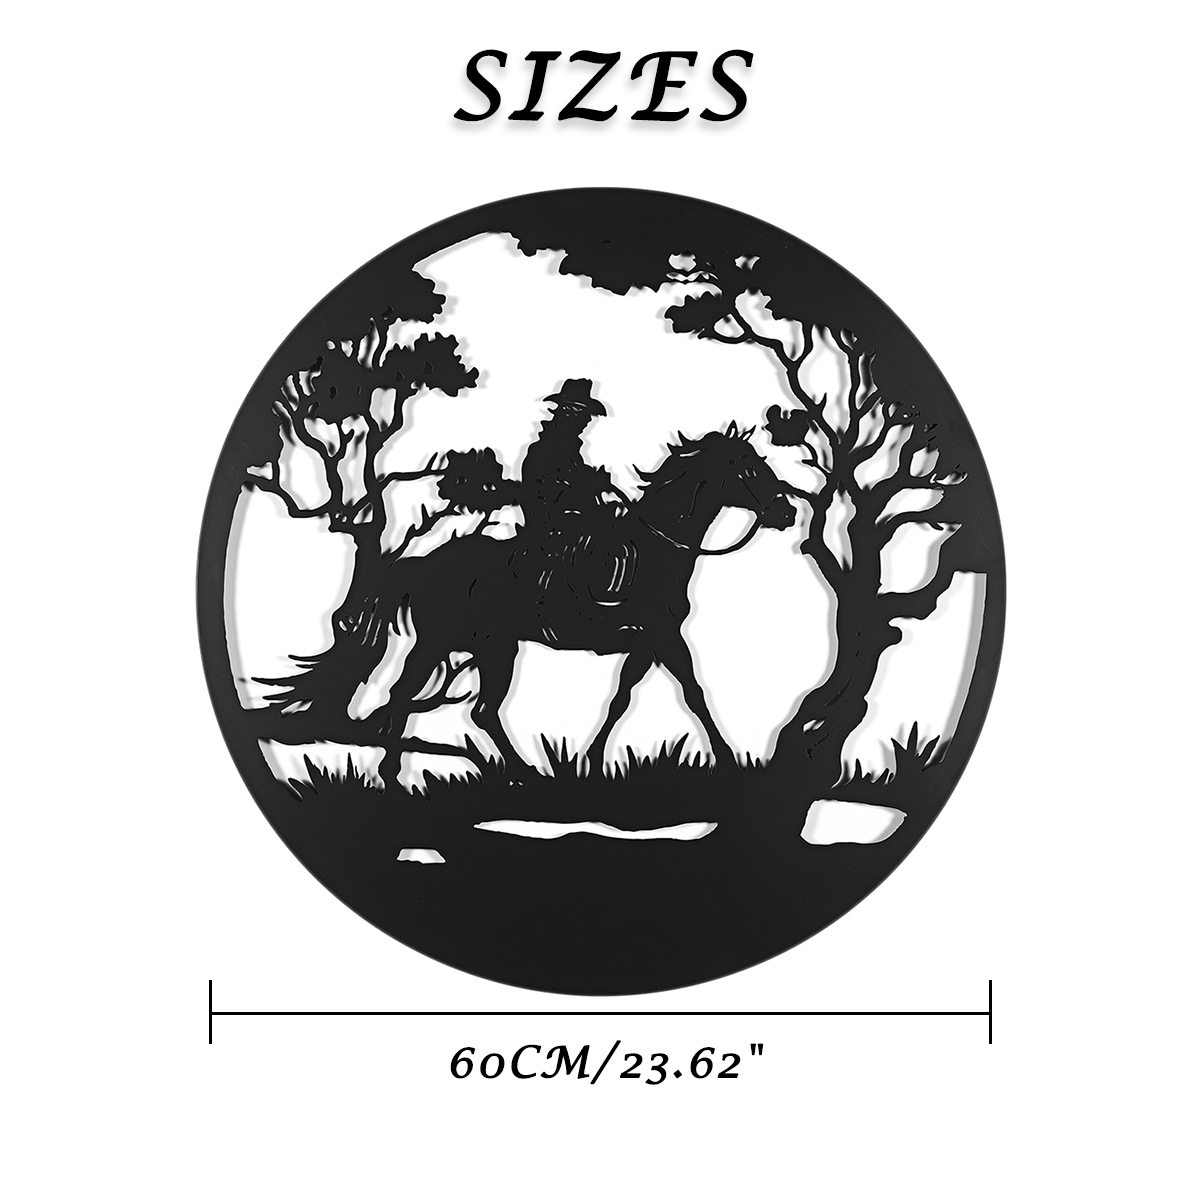 Man-Riding-Horse-In-Forest-Round-Black-Metal-Wall-Hanging-Art-Decoration-Room-1794308-5